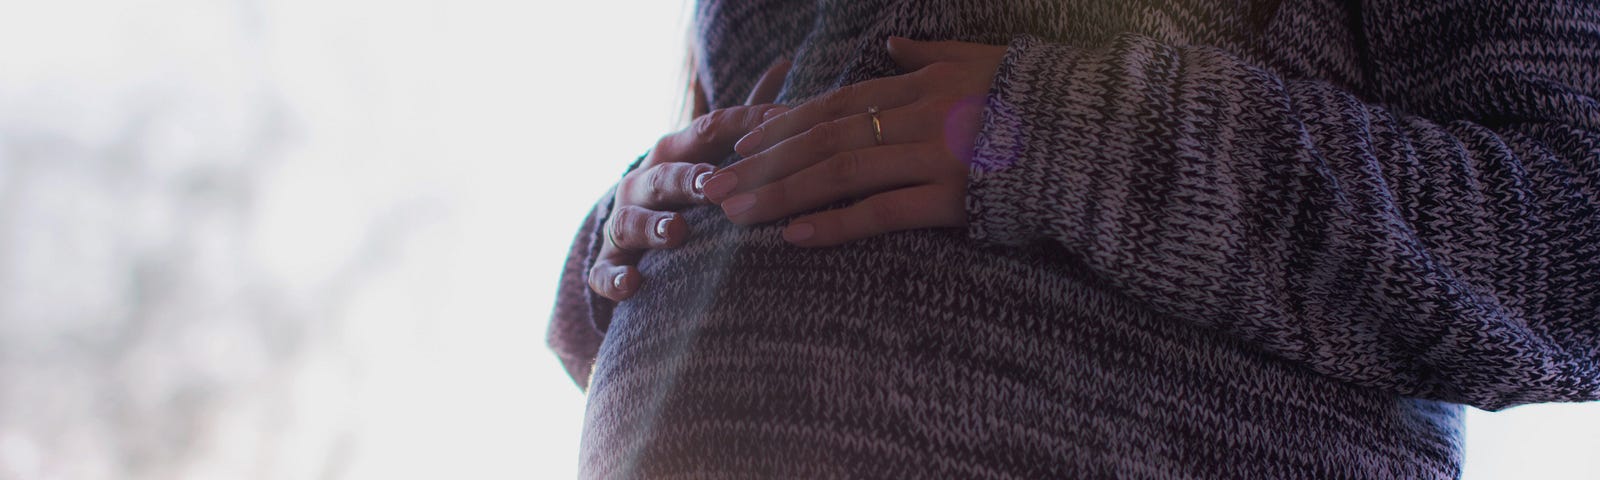 A pregnant person wearing a knitted sweater and holding their belly.